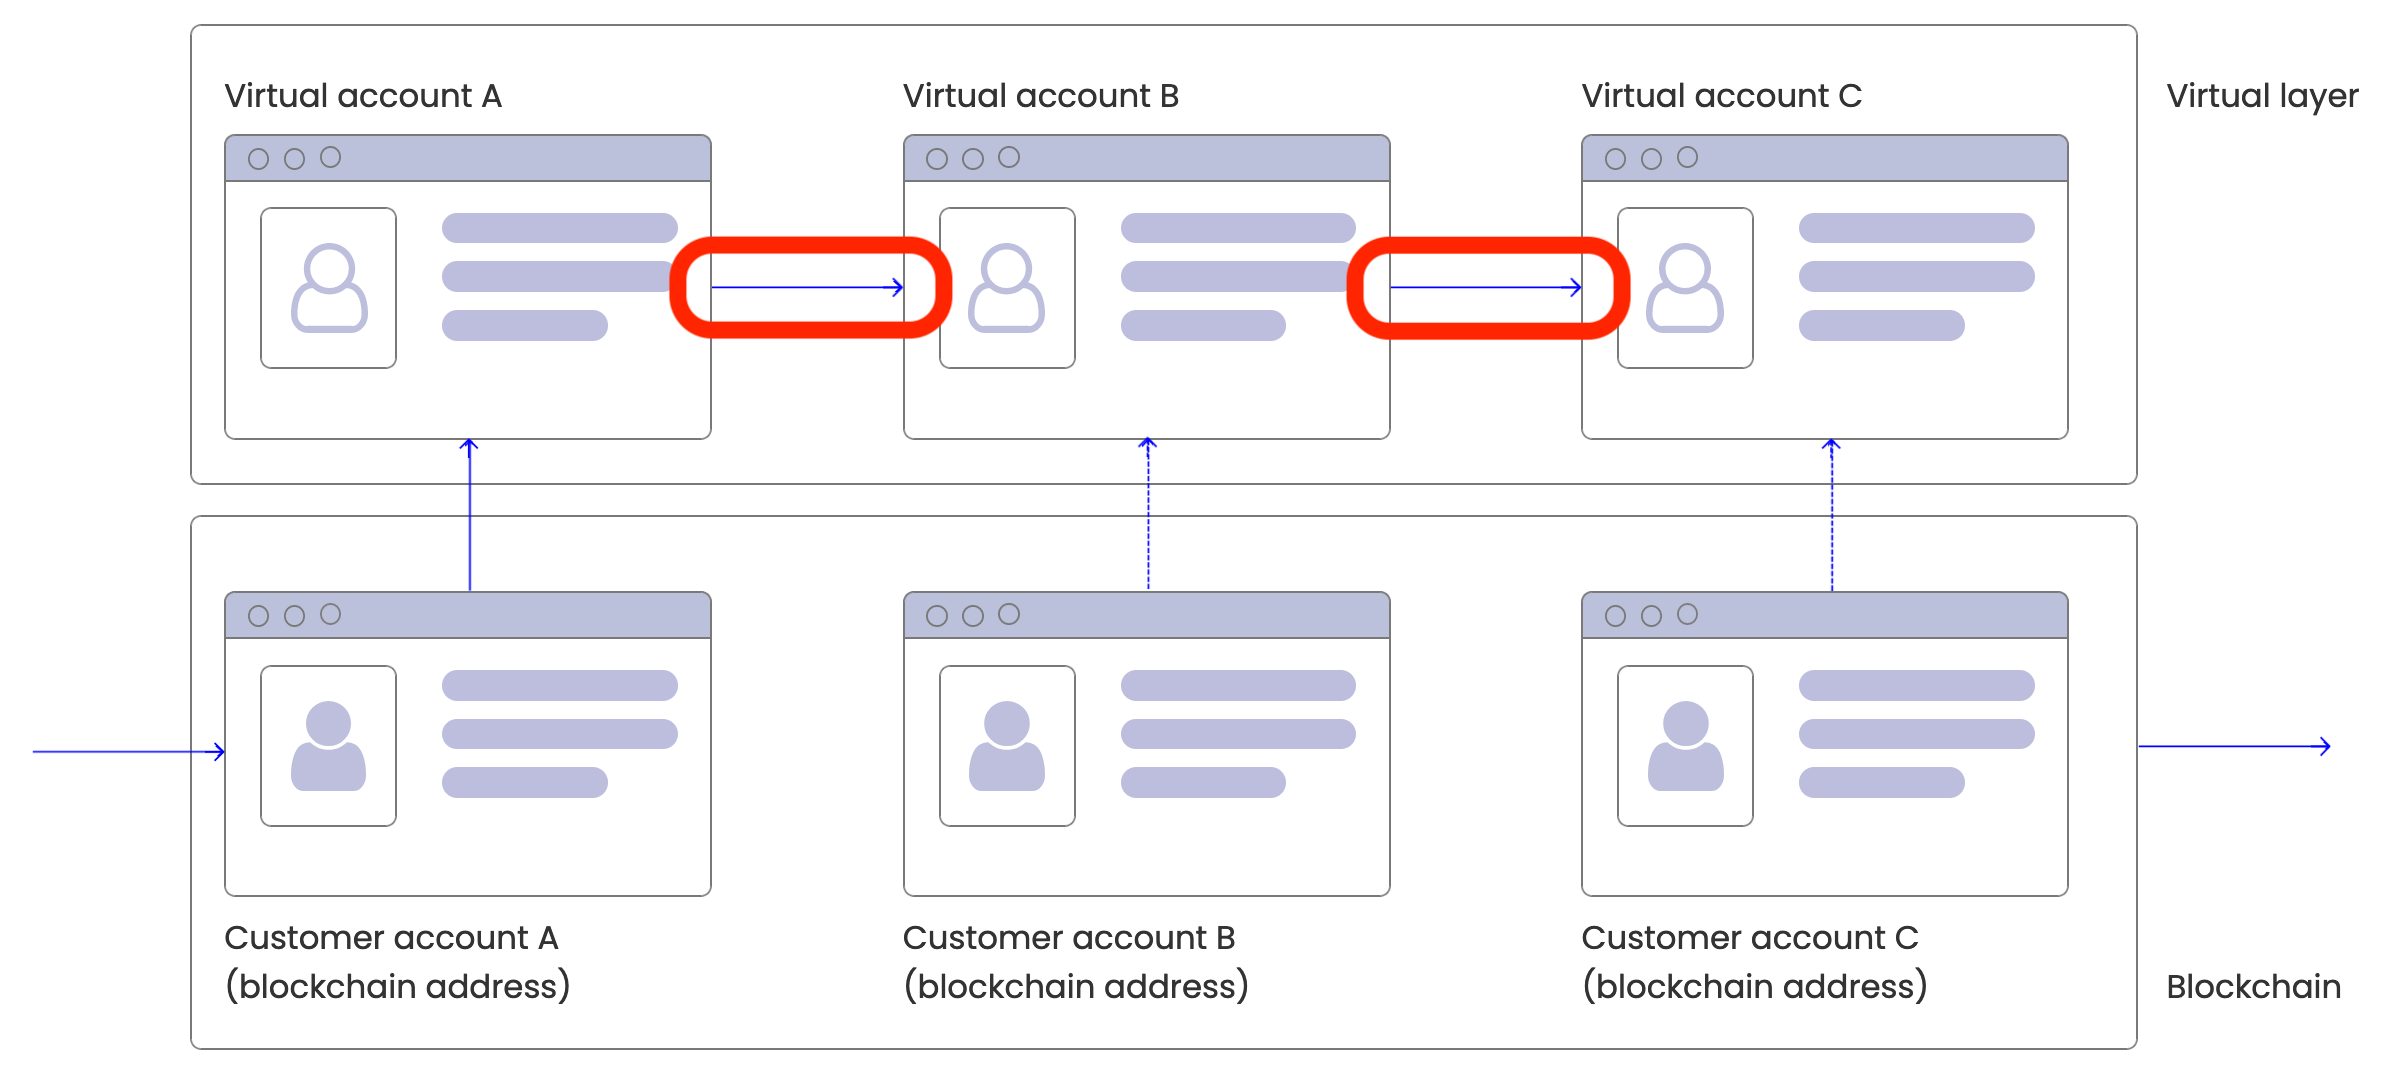 Virtual Account off-chain transfers do not affect on-chain assets